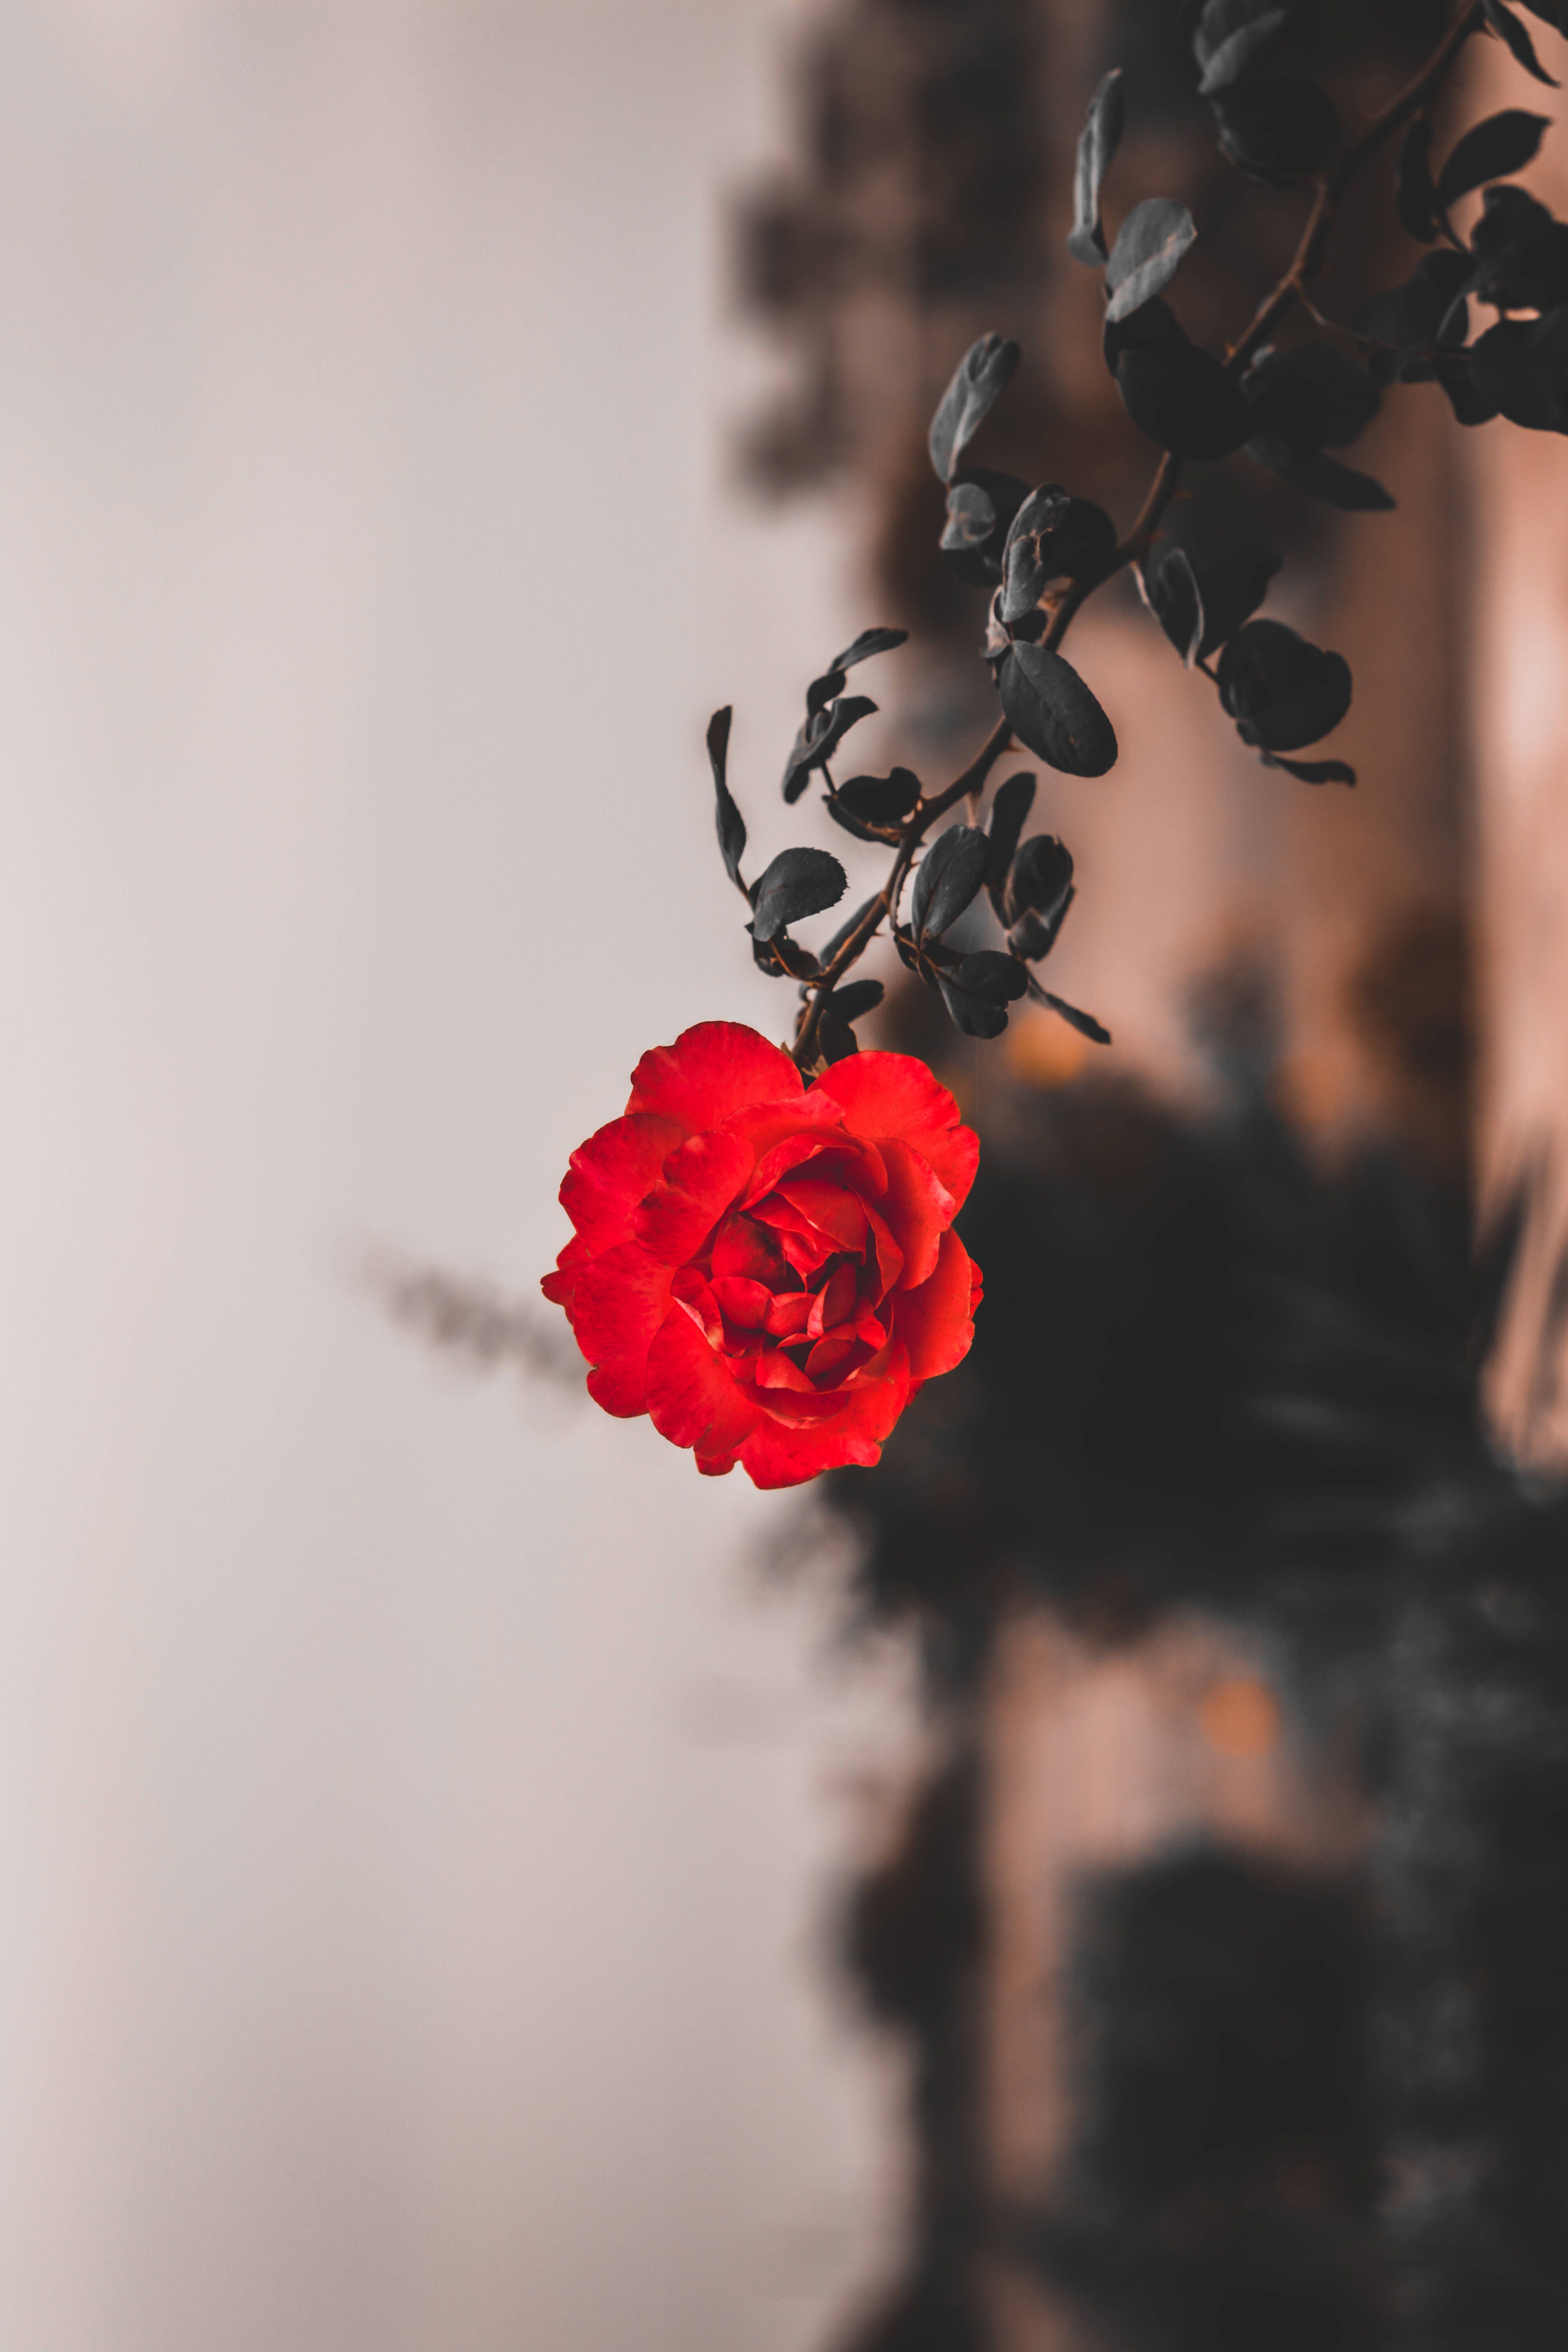 Download Aesthetic Fresh Red Rose iPhone Wallpaper